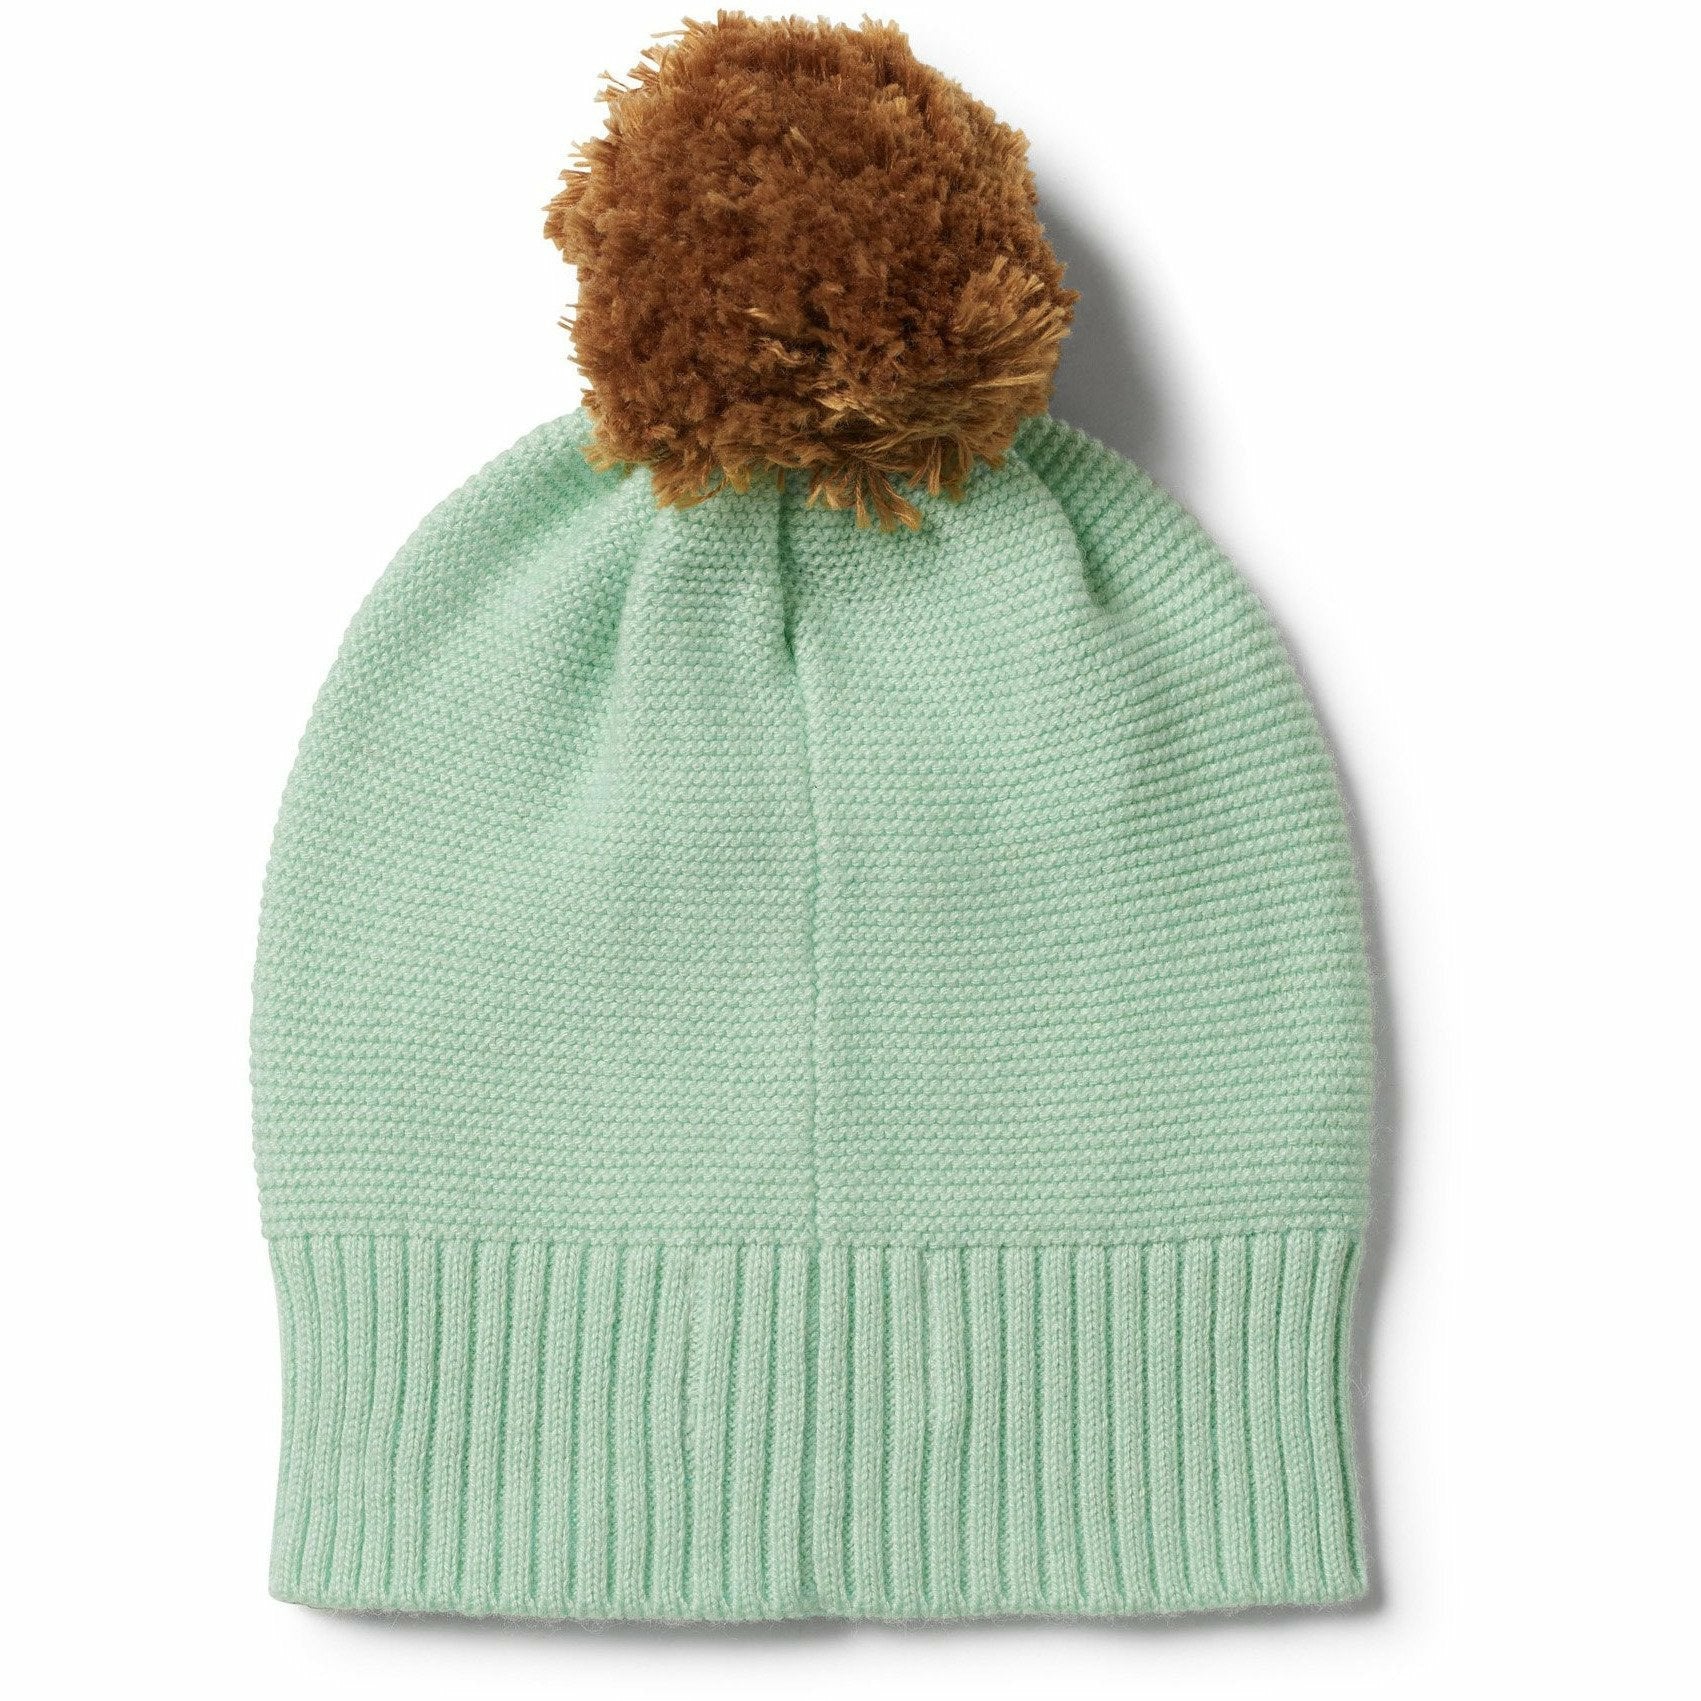 Moss Green Knitted Hat With Pom Pom